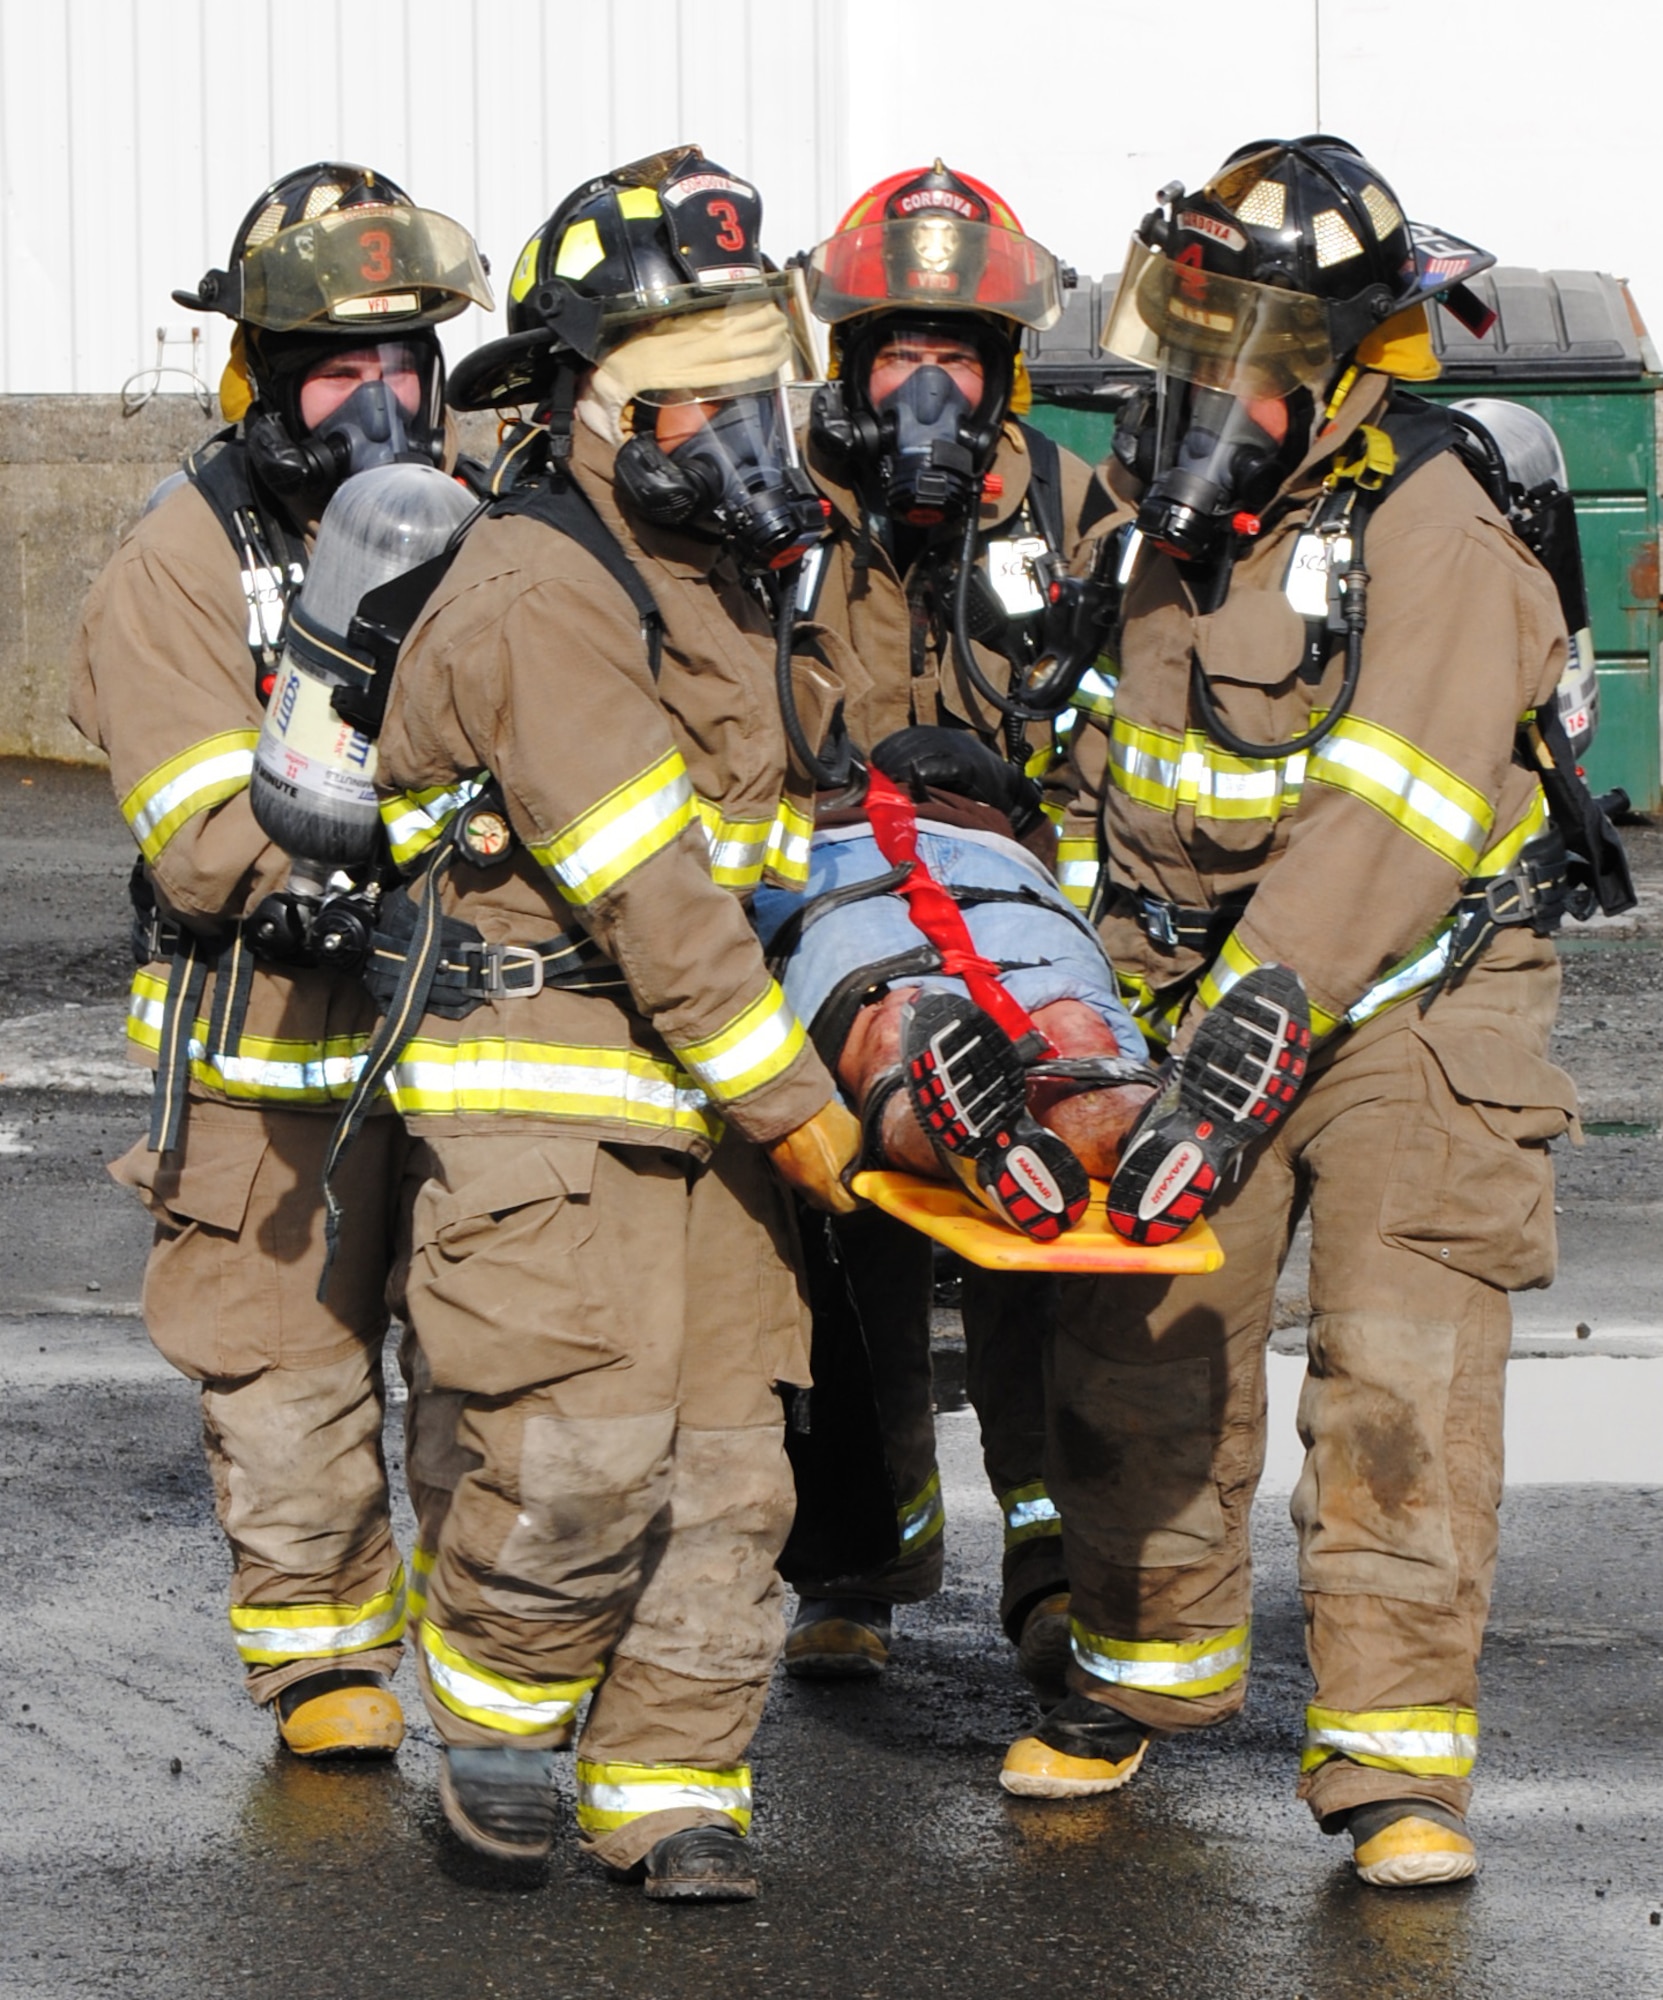 CORDOVA, Alaska -- A victim is carried away on a backboard by firefighters from the Cordova Volunteer Fire Department after a simulated earthquake and explosion occurred April 30, 2010, during Arctic Edge 10 training at the Trident Seafoods Alaskan plant in Cordova, Alaska.  This week-long exercise was conducted April 26 to May 1 and allowed emergency responders from federal, state and local agencies the opportunity to work together in a natural disaster scenario. (U.S. Army photo by Spc. Amie J. McMillan, 10th Press Camp Headquarters)